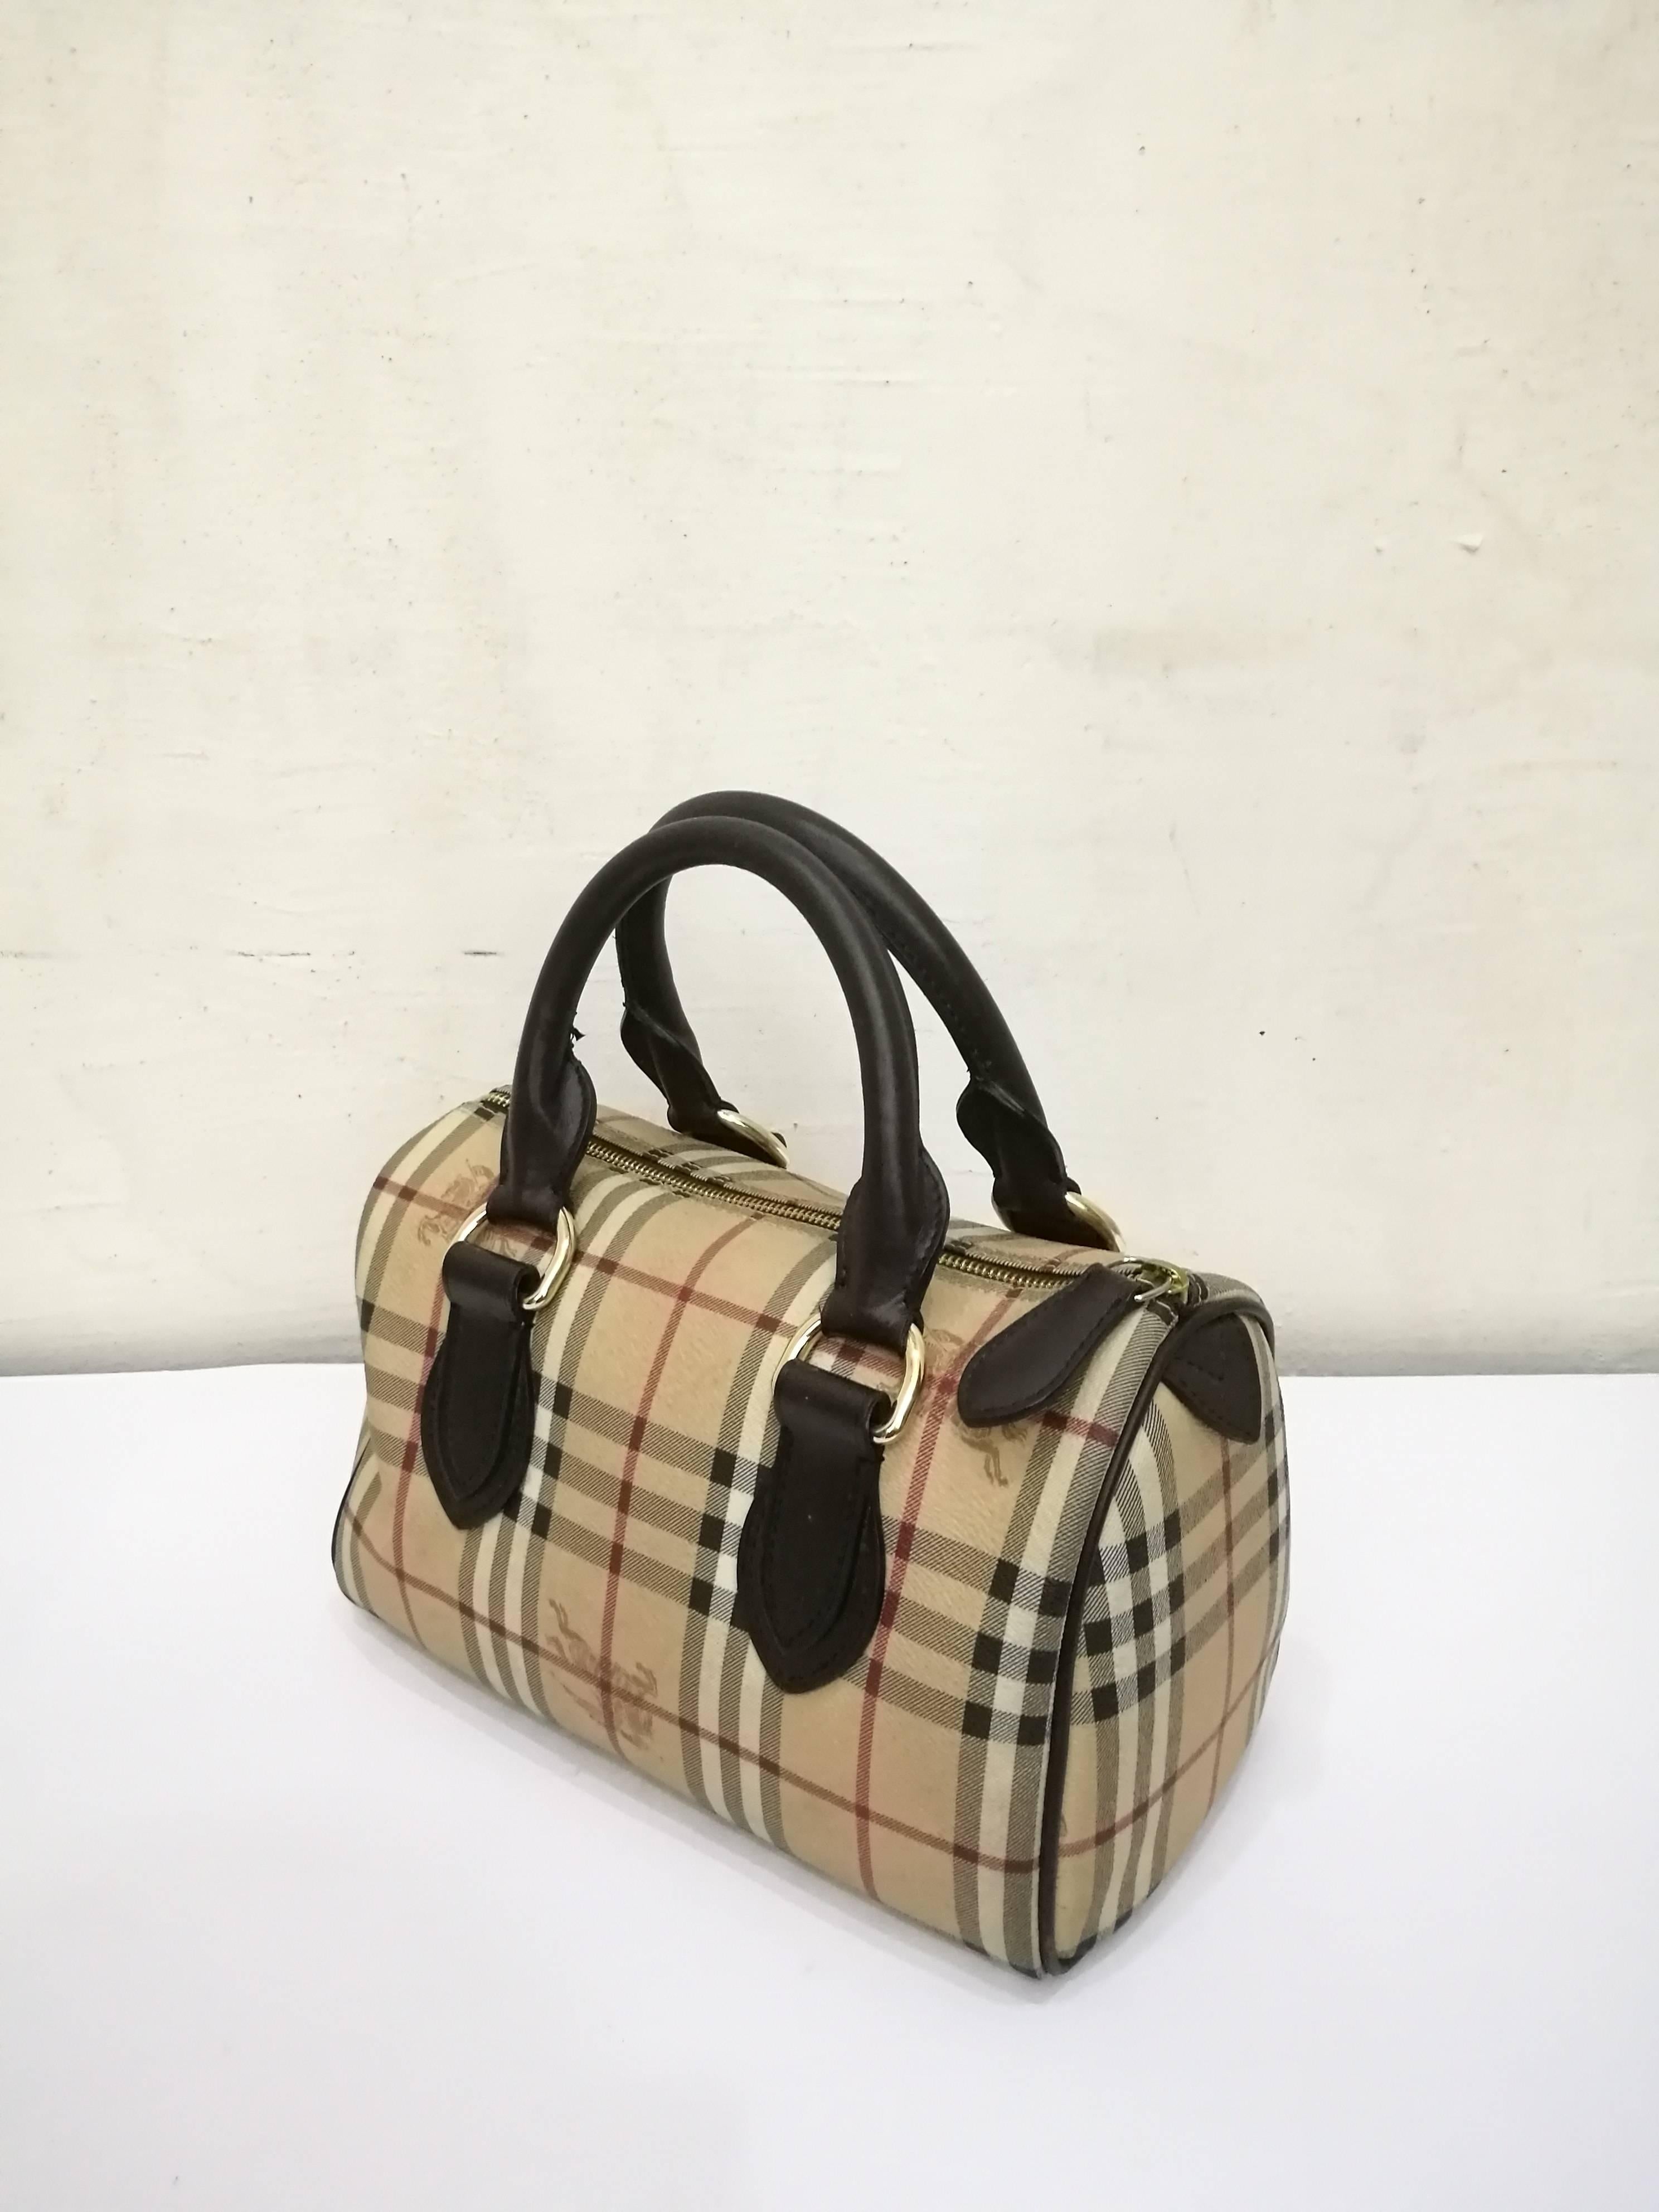 Burberry Multicolour Boston Bag
Totally made in italy